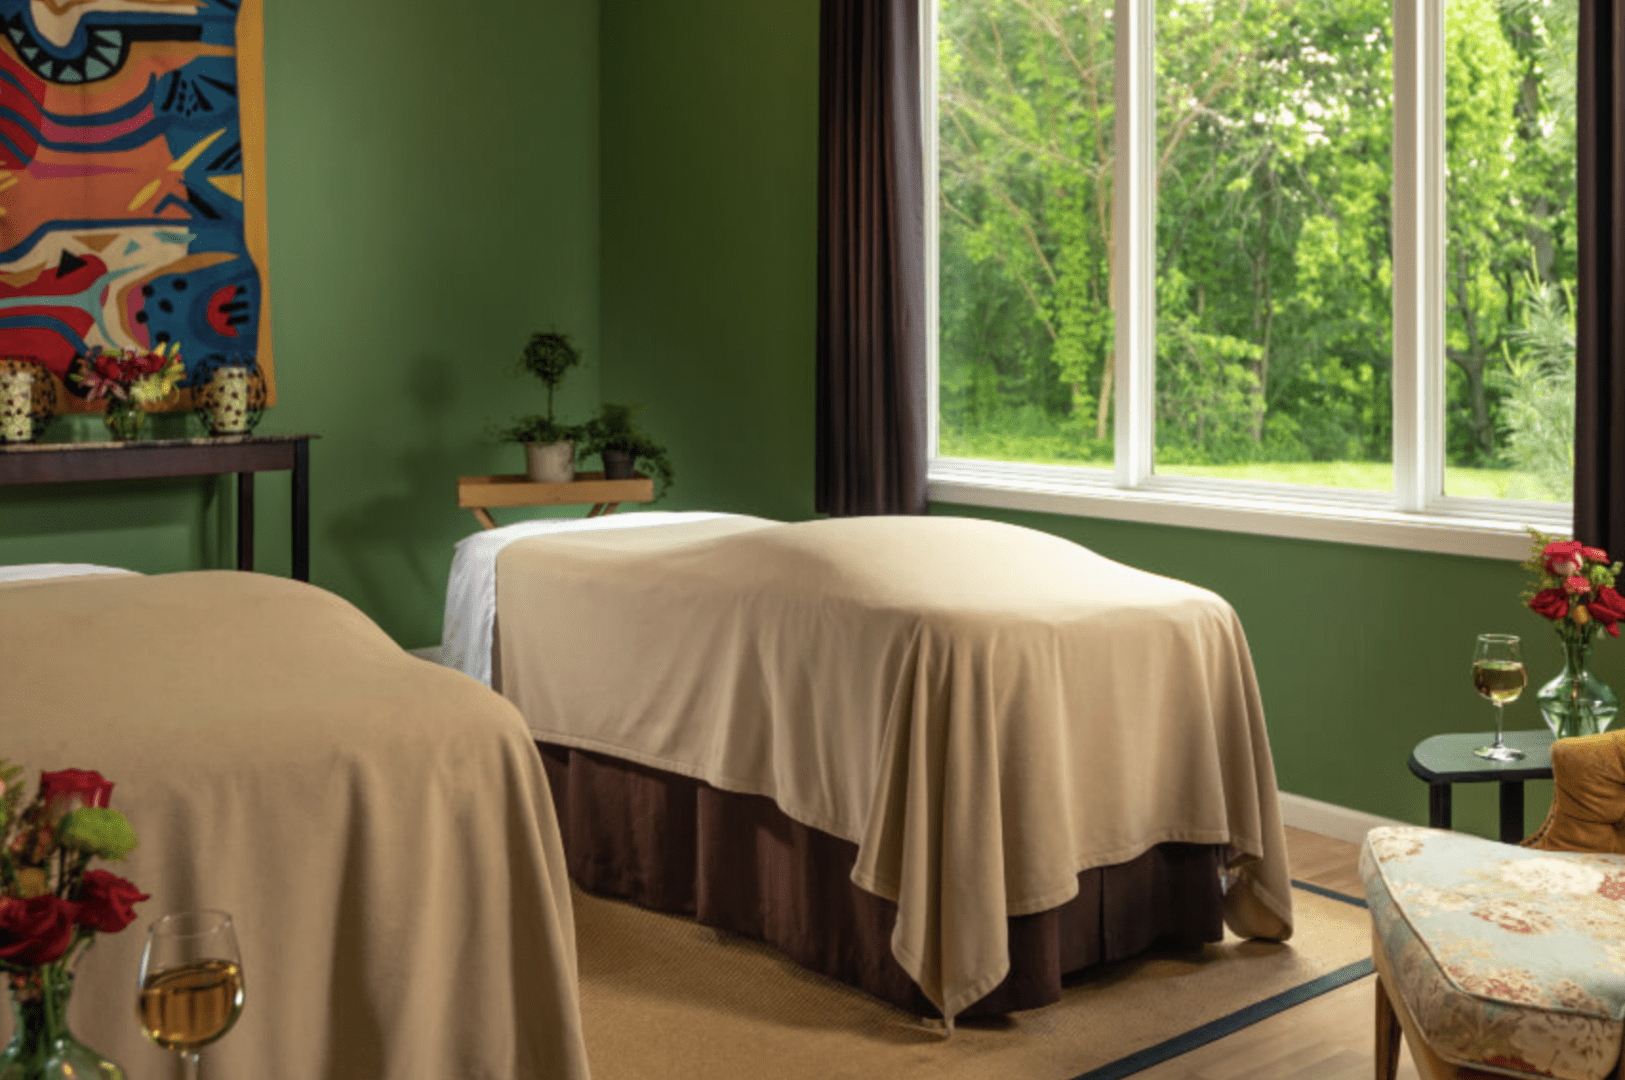 Two spa tables with a window showing greenery